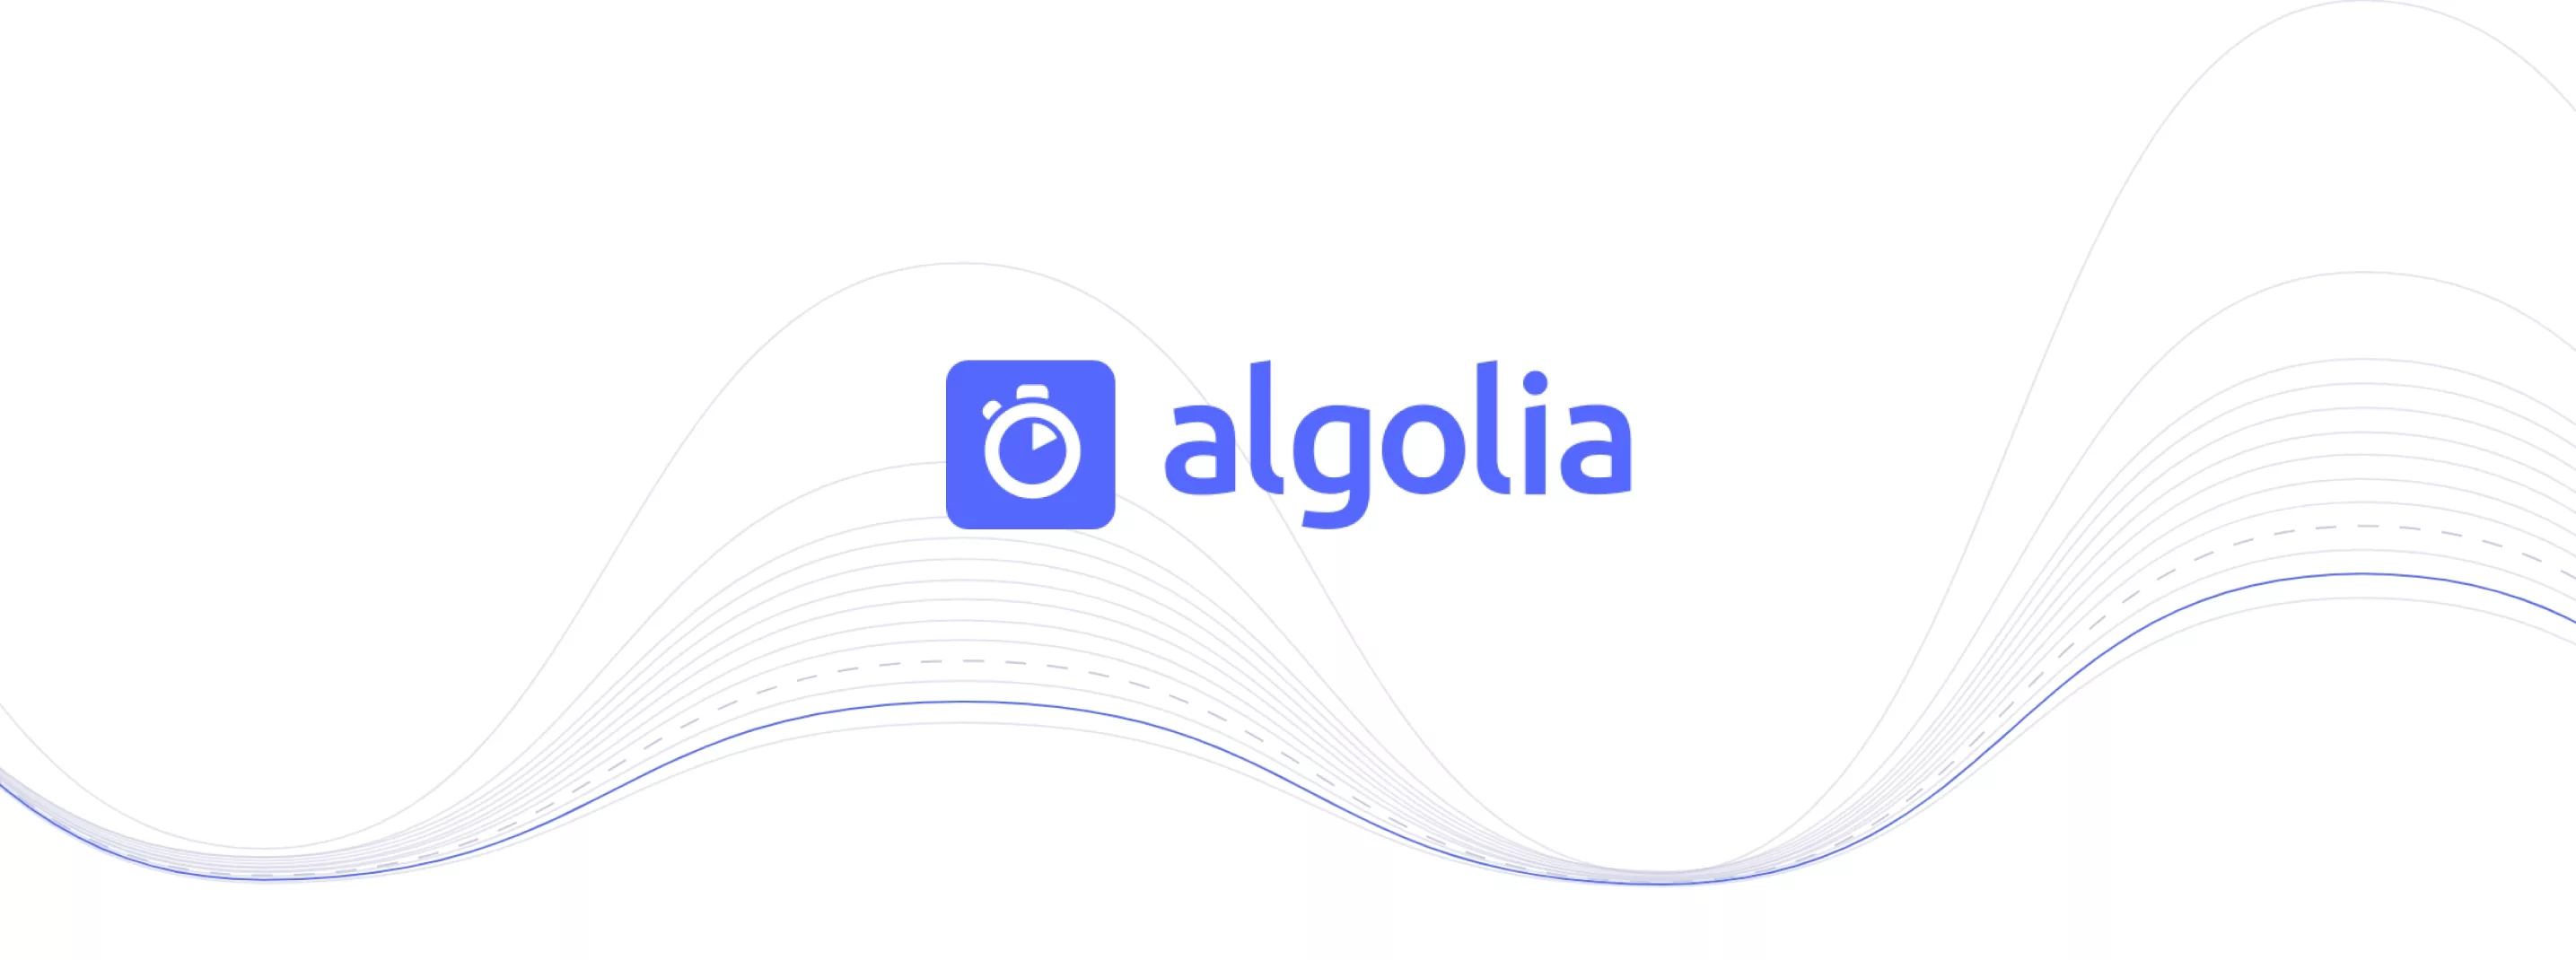 Algolia is an AI powered search engine